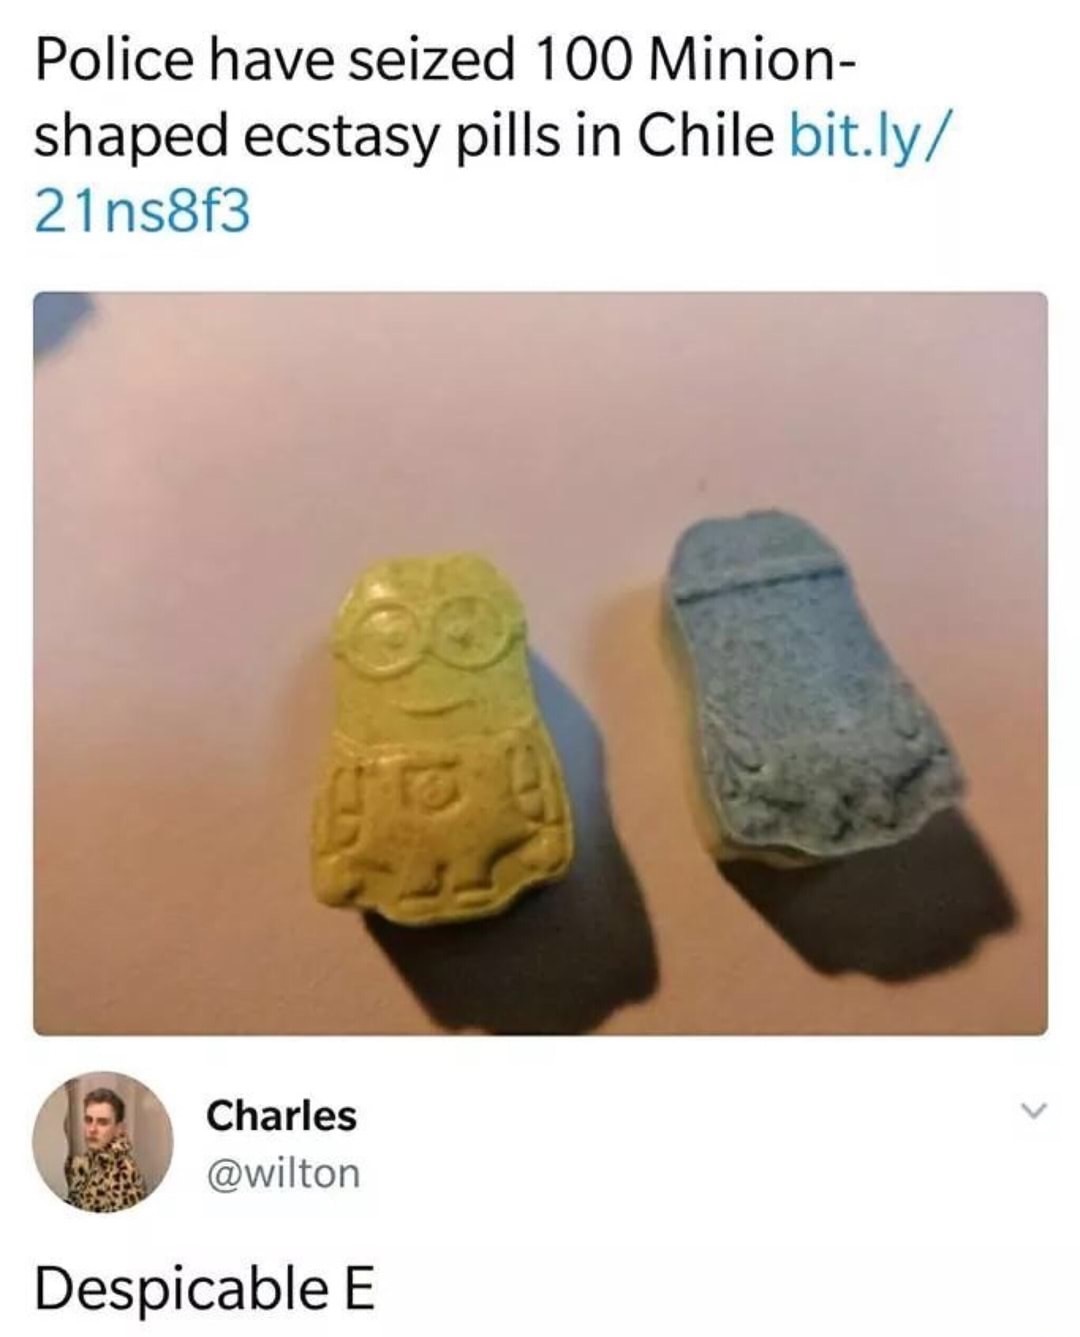 minions ecstasy - Police have seized 100 Minion shaped ecstasy pills in Chile bit.ly 21ns8f3 Charles Despicable E